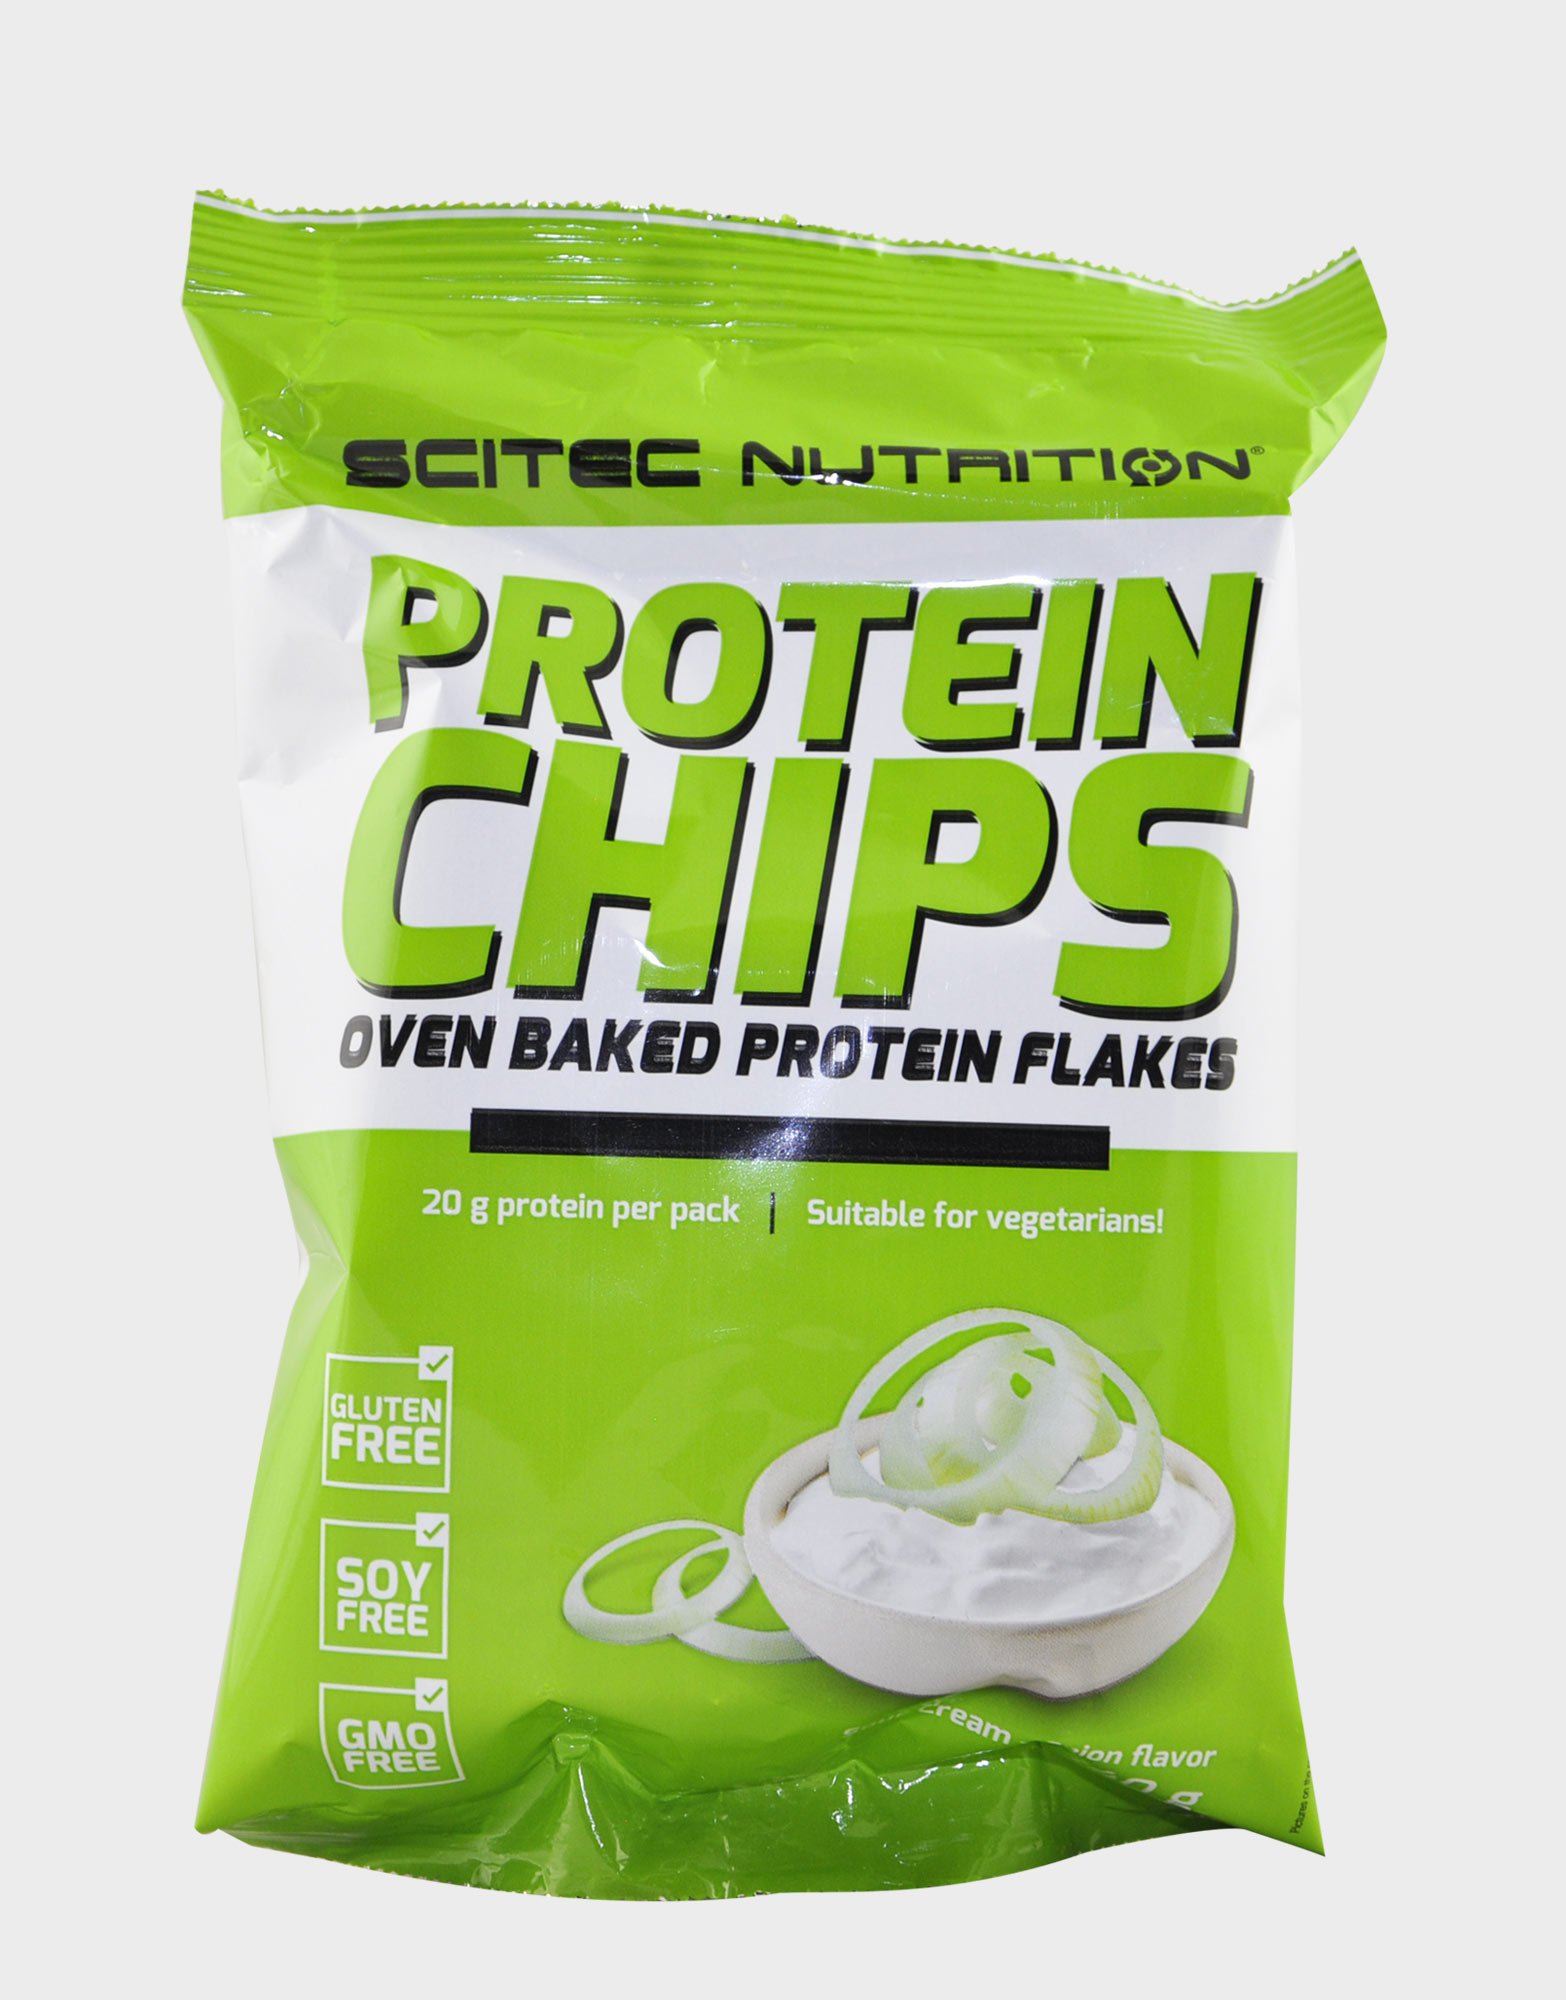 Protein Chips, 40 g, Scitec Nutrition. Meal replacement. 